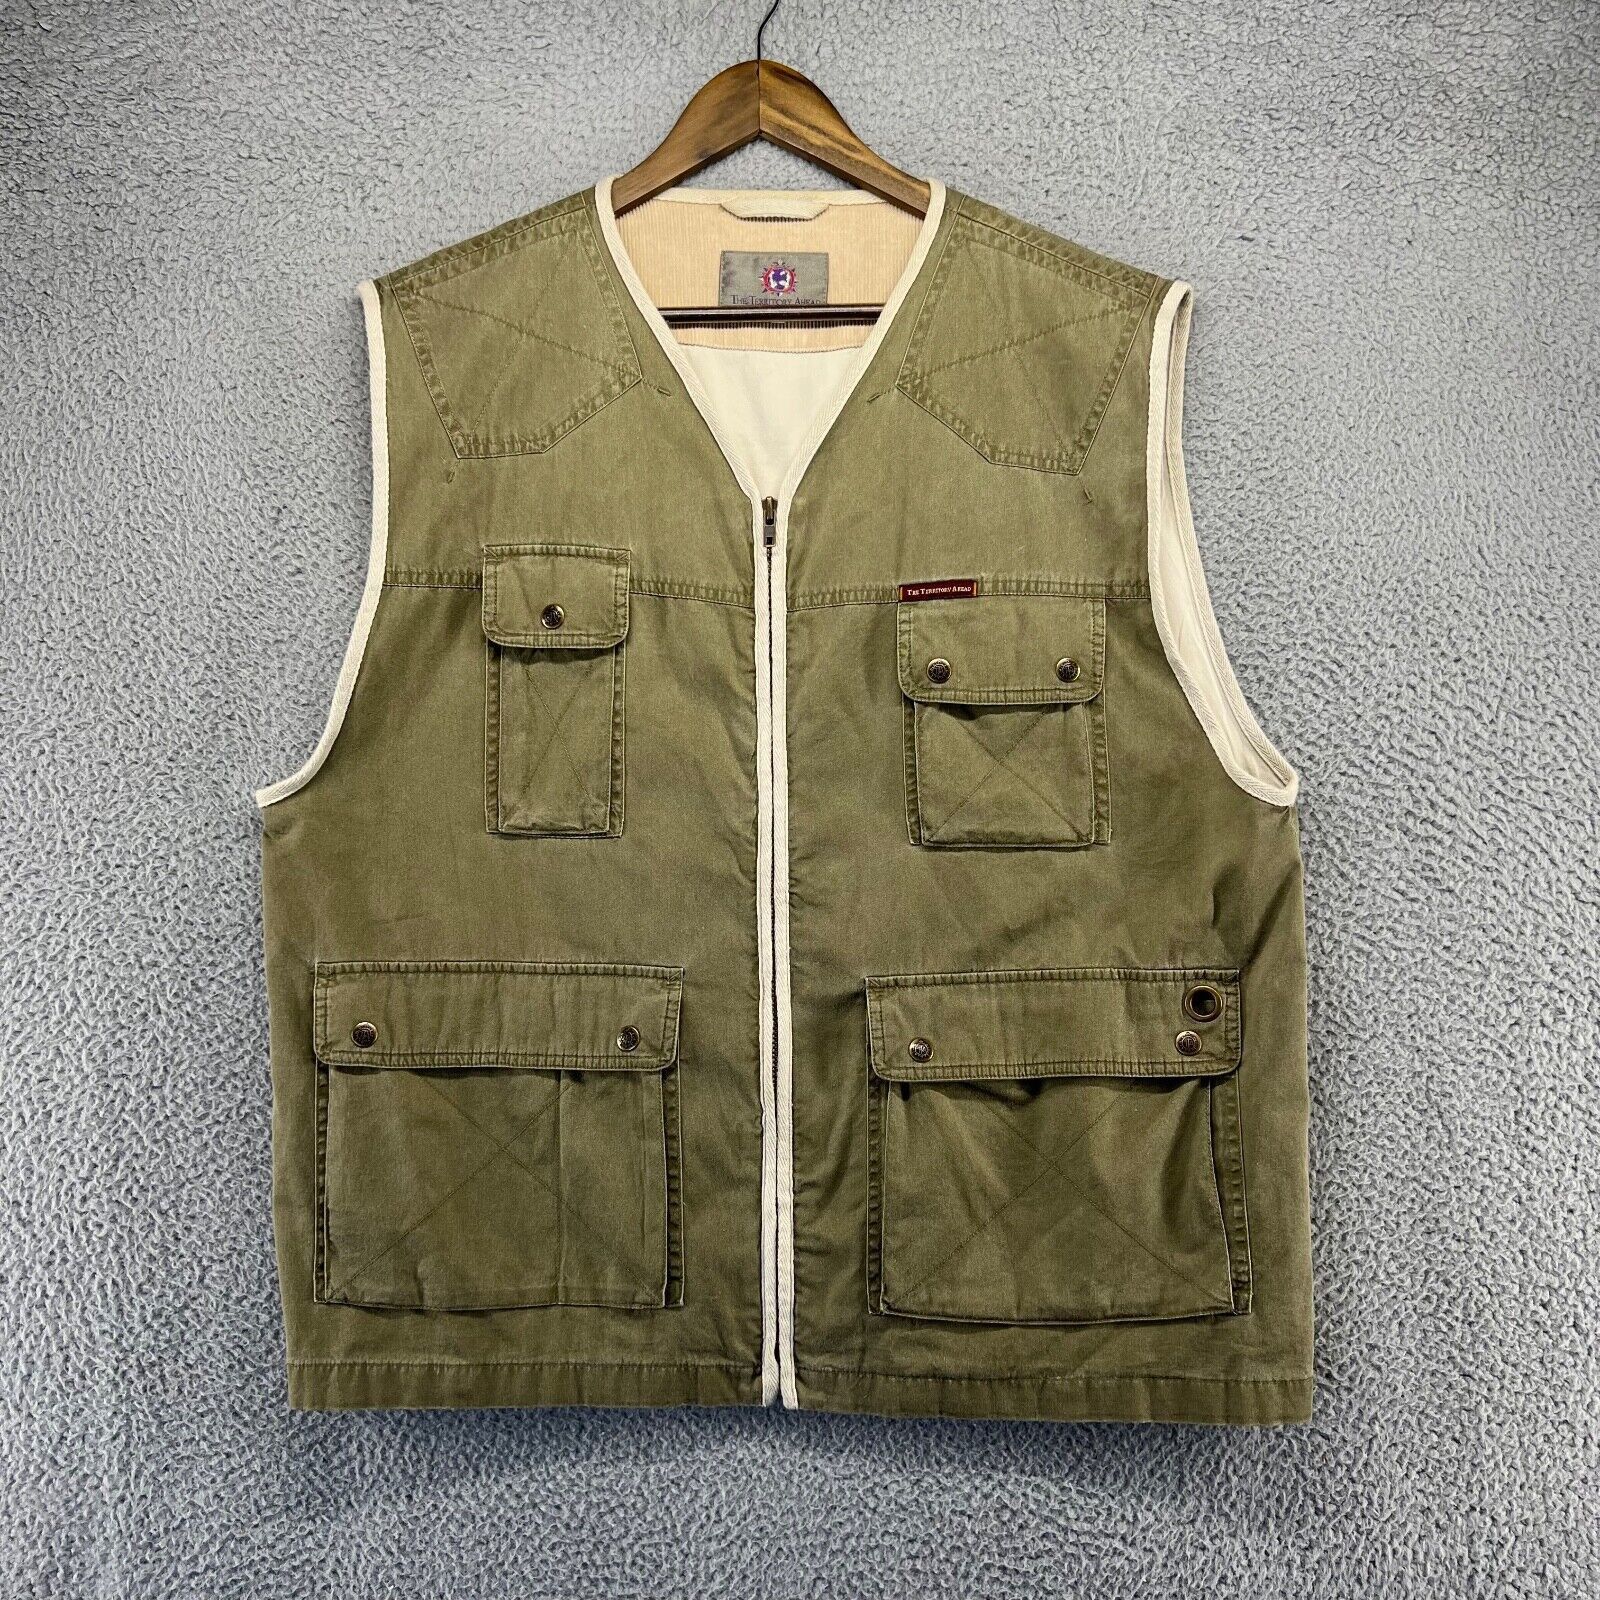 The Territory Ahead Vintage Territory Ahead Vest Mens Extra Large Green ...